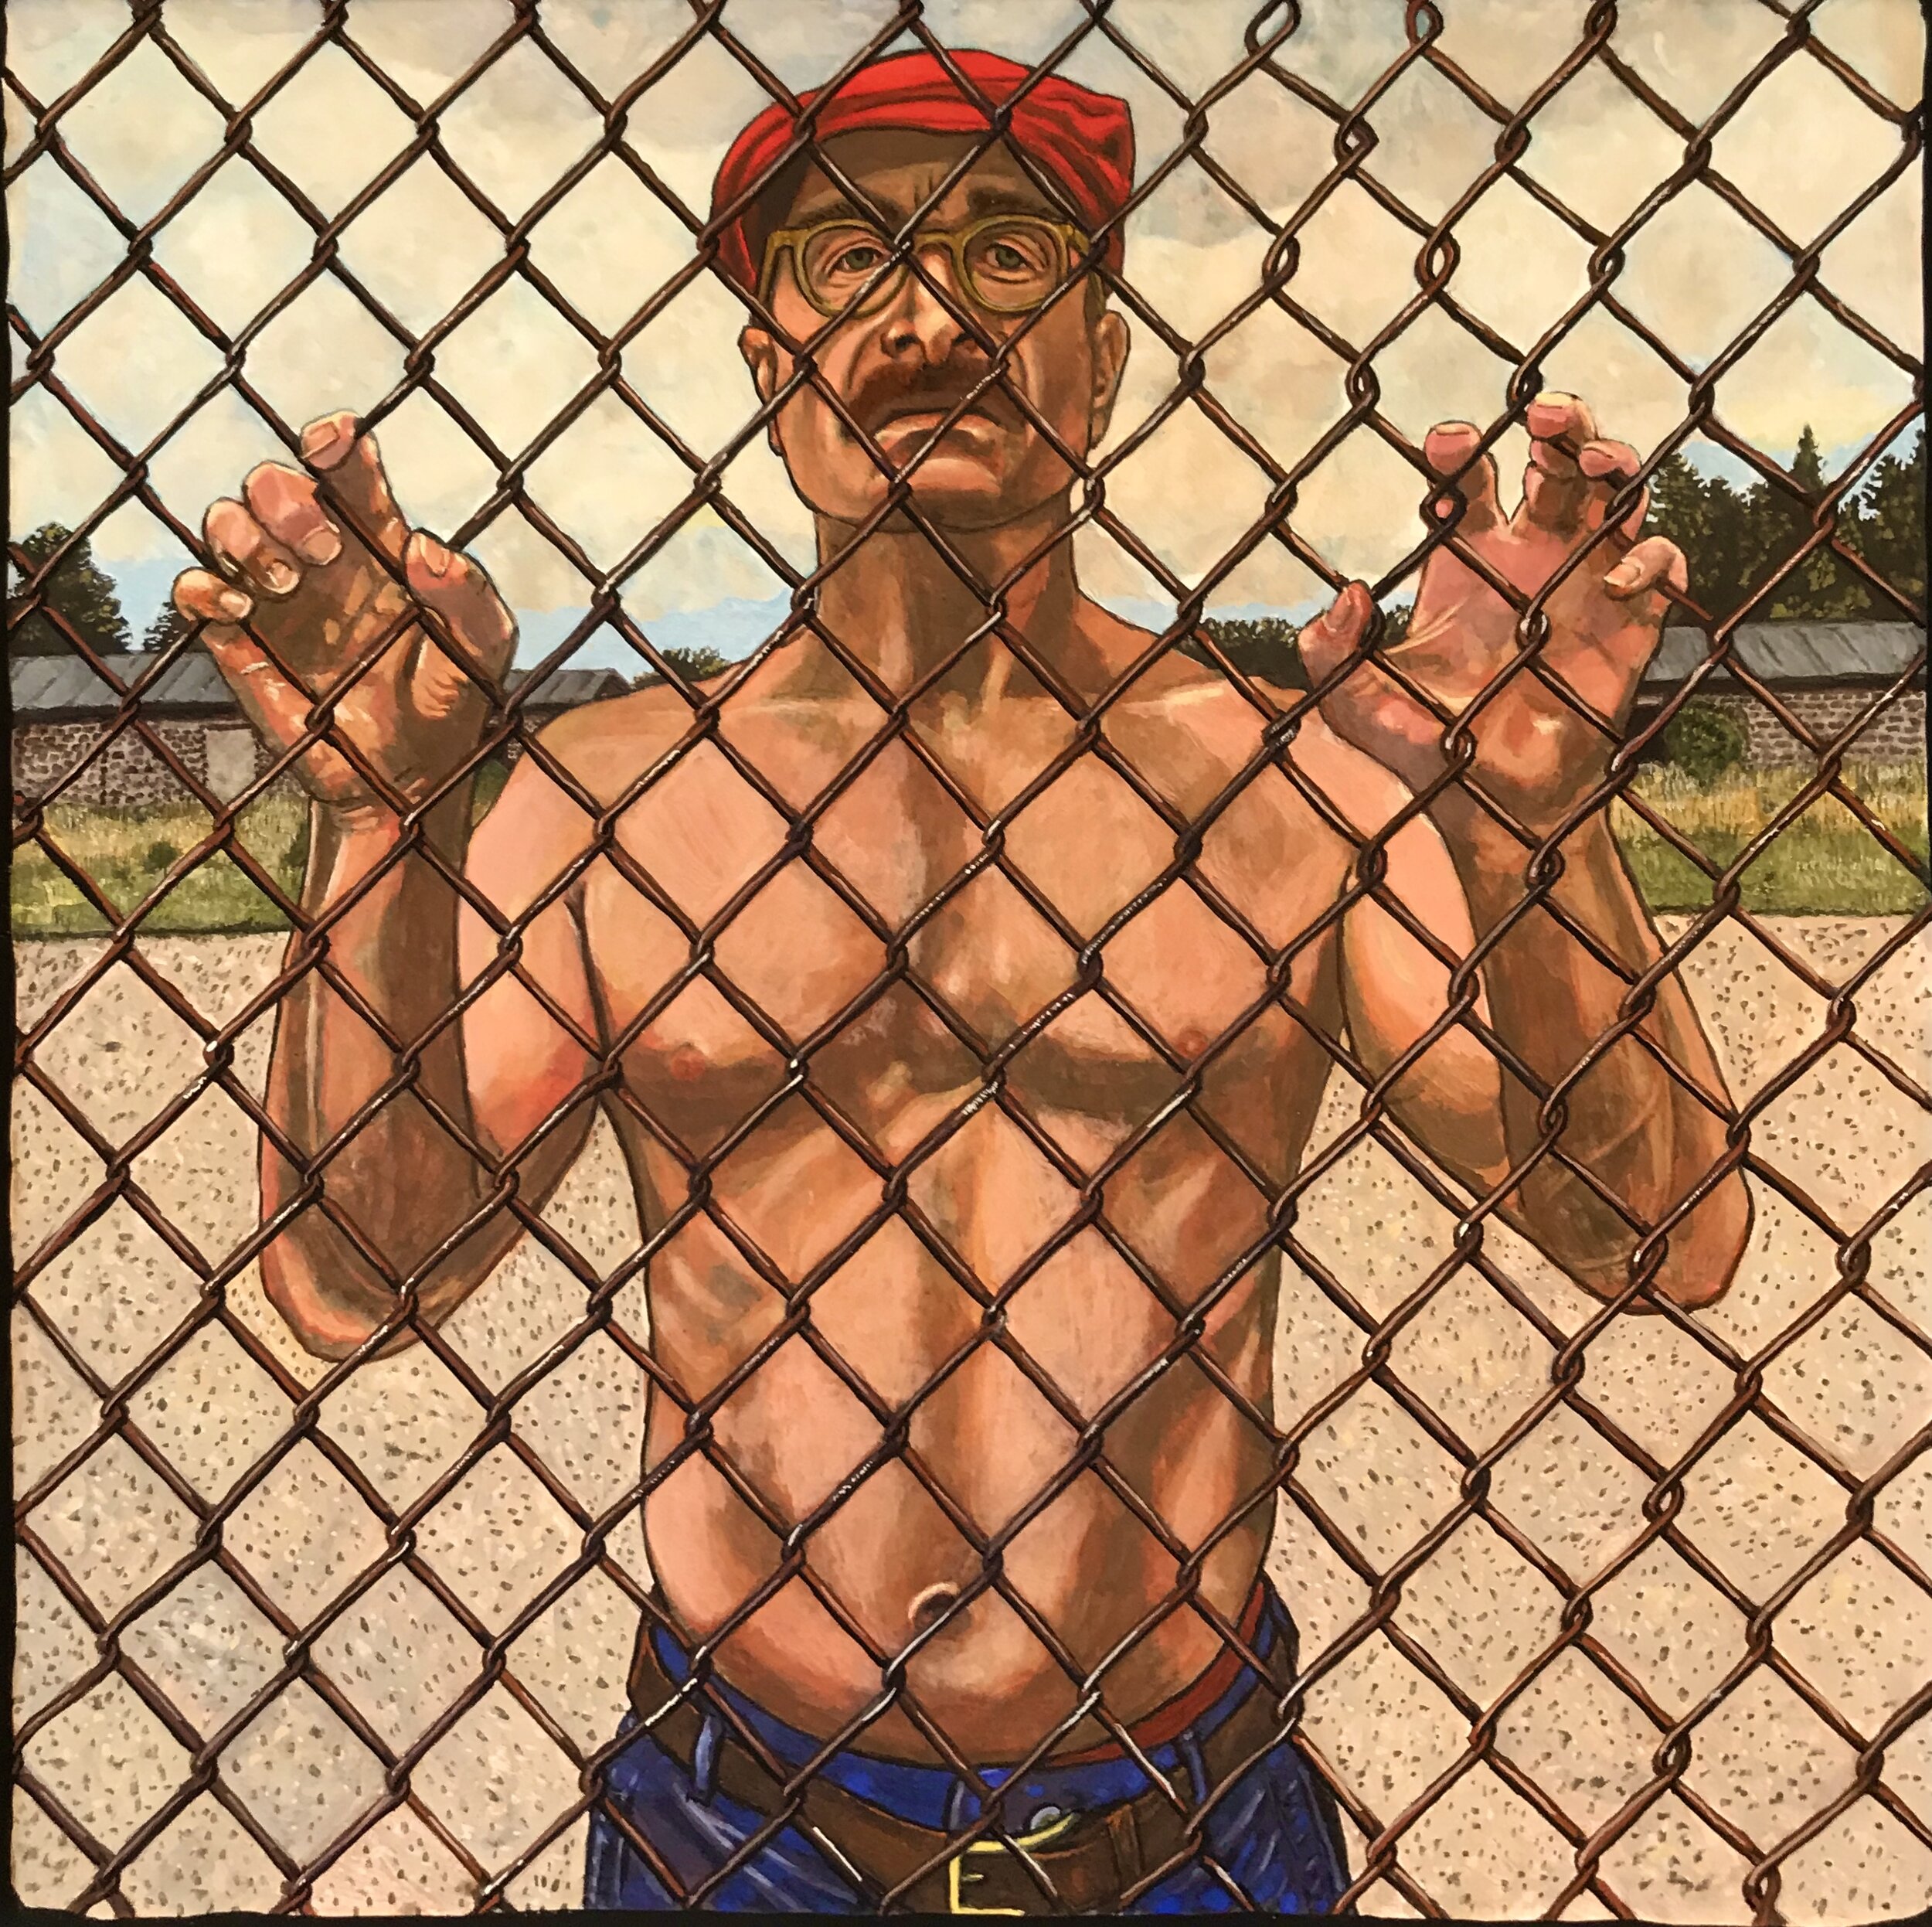 Self Portrait On The Wrong Side Of A Fence